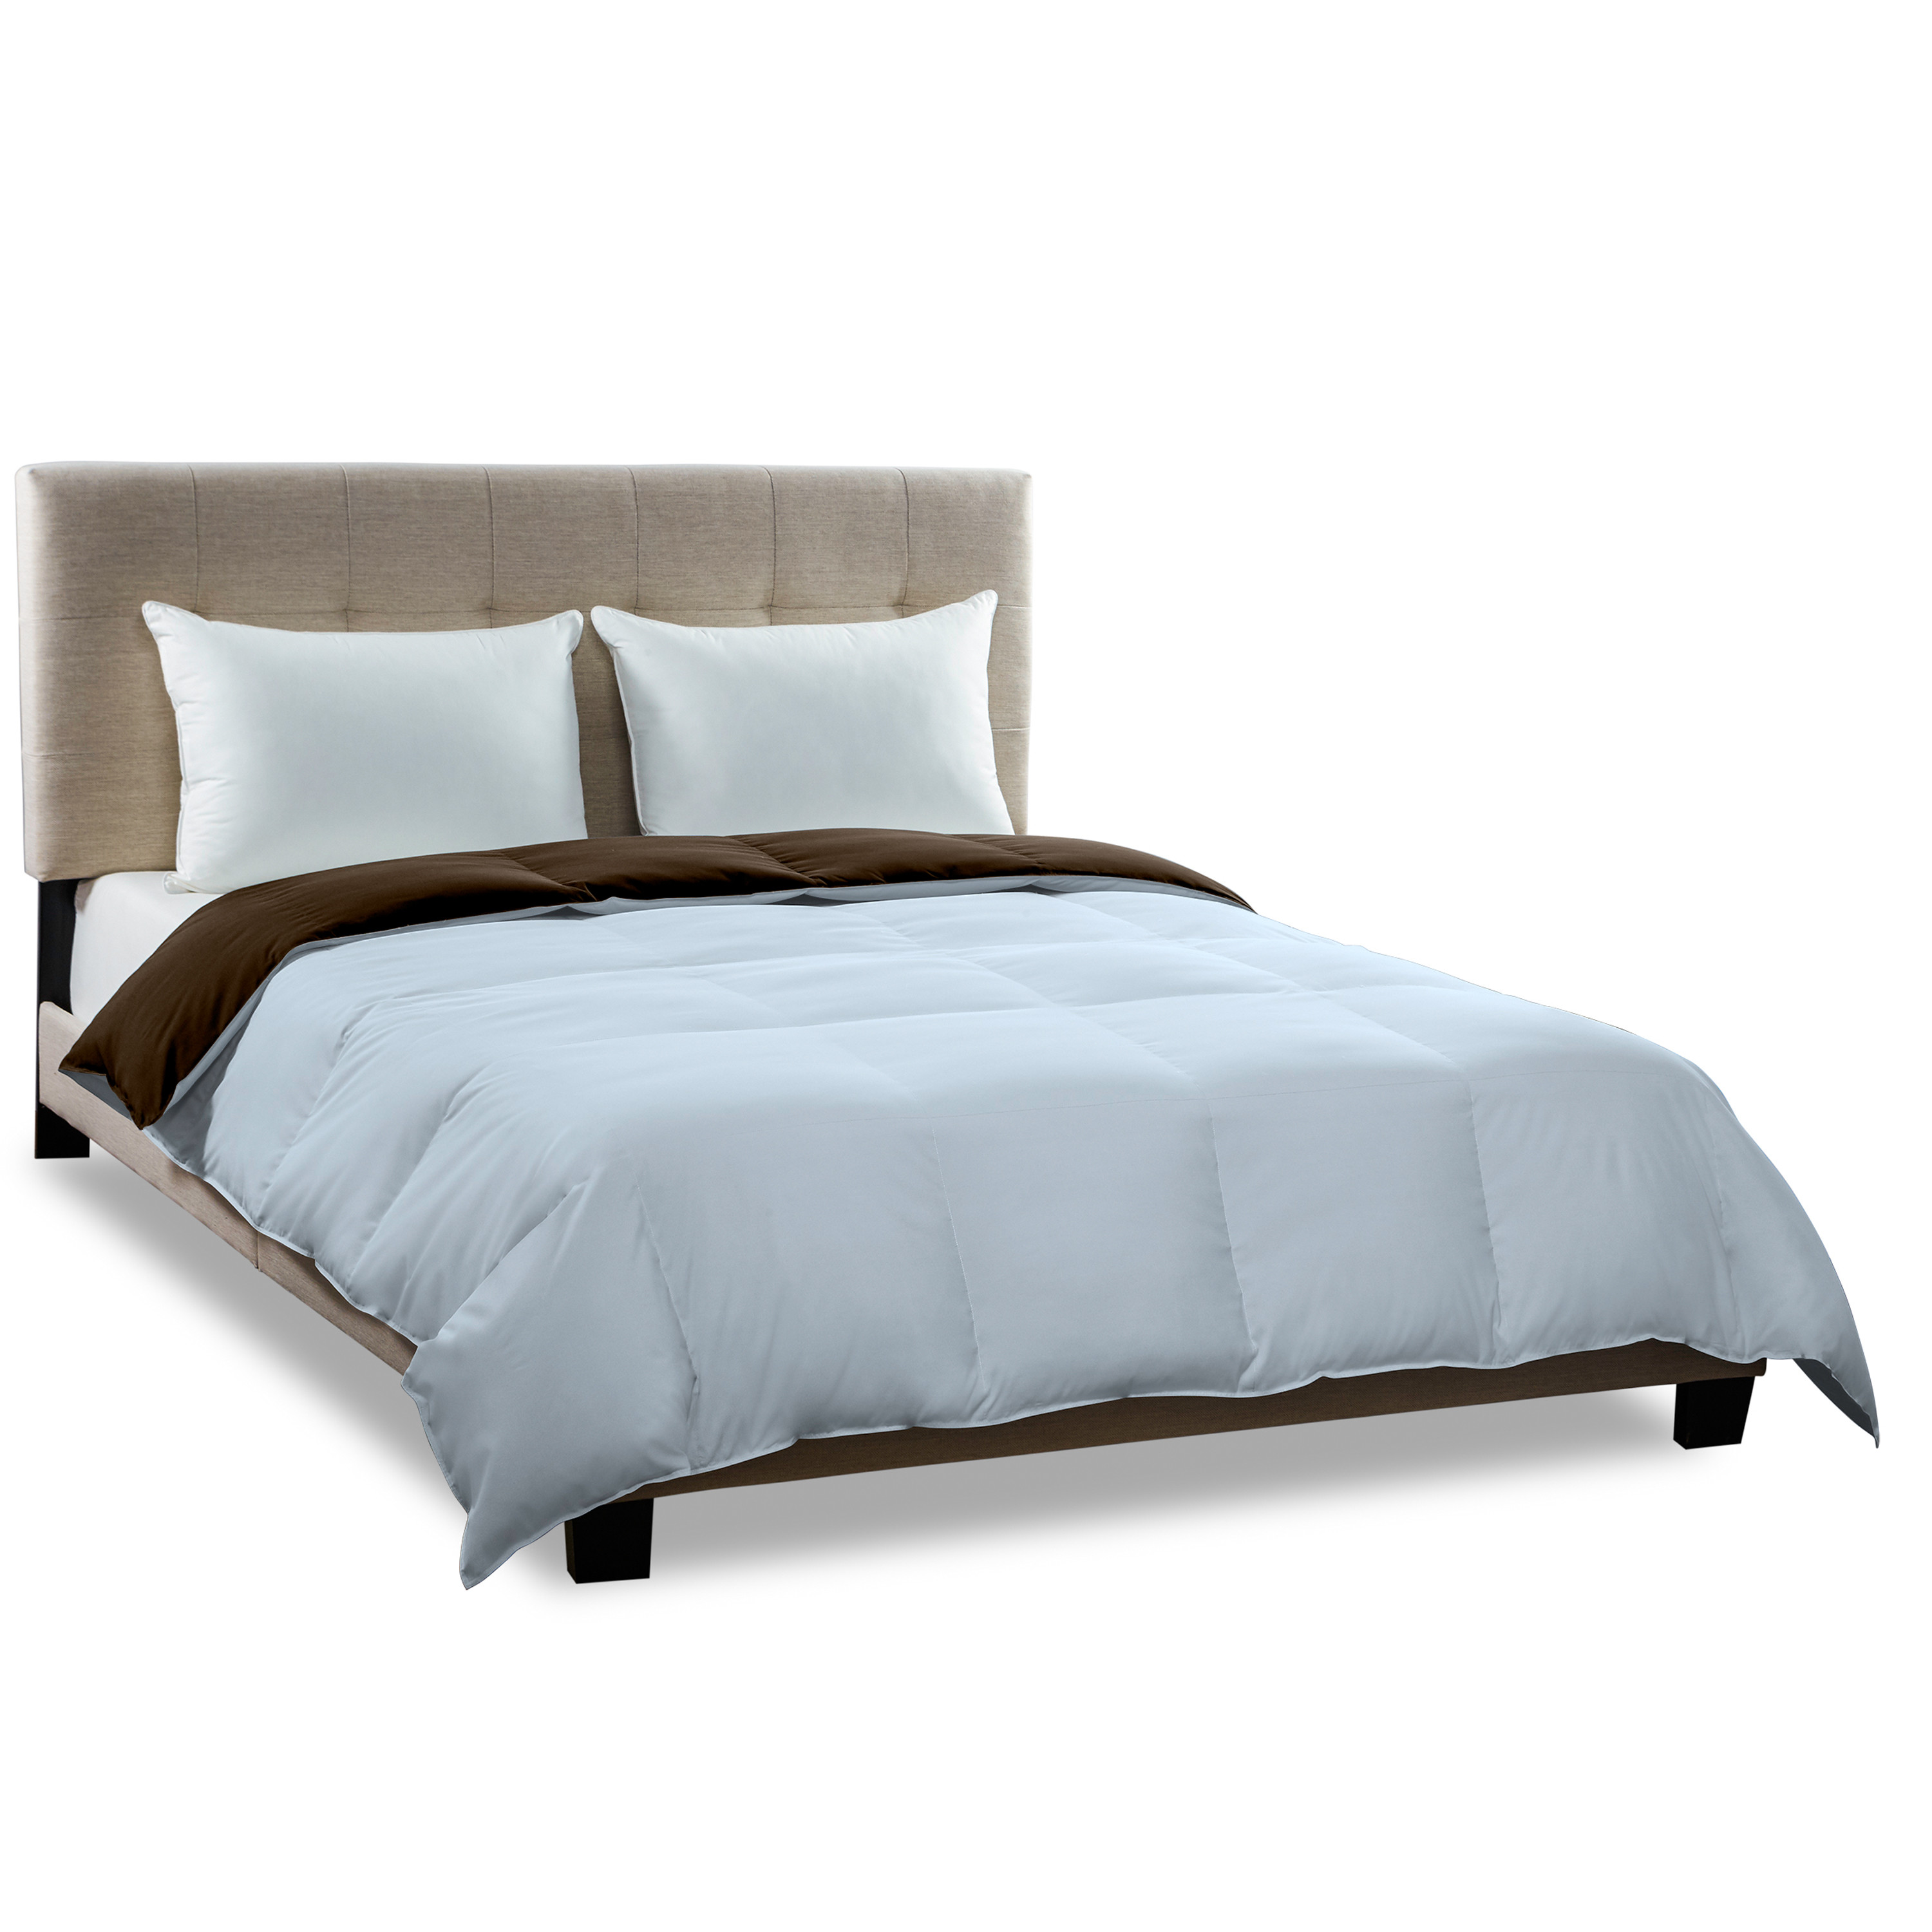 Dreamy Nights Reversible Down Comforter in Choice of Colors and Sizes - image 1 of 7